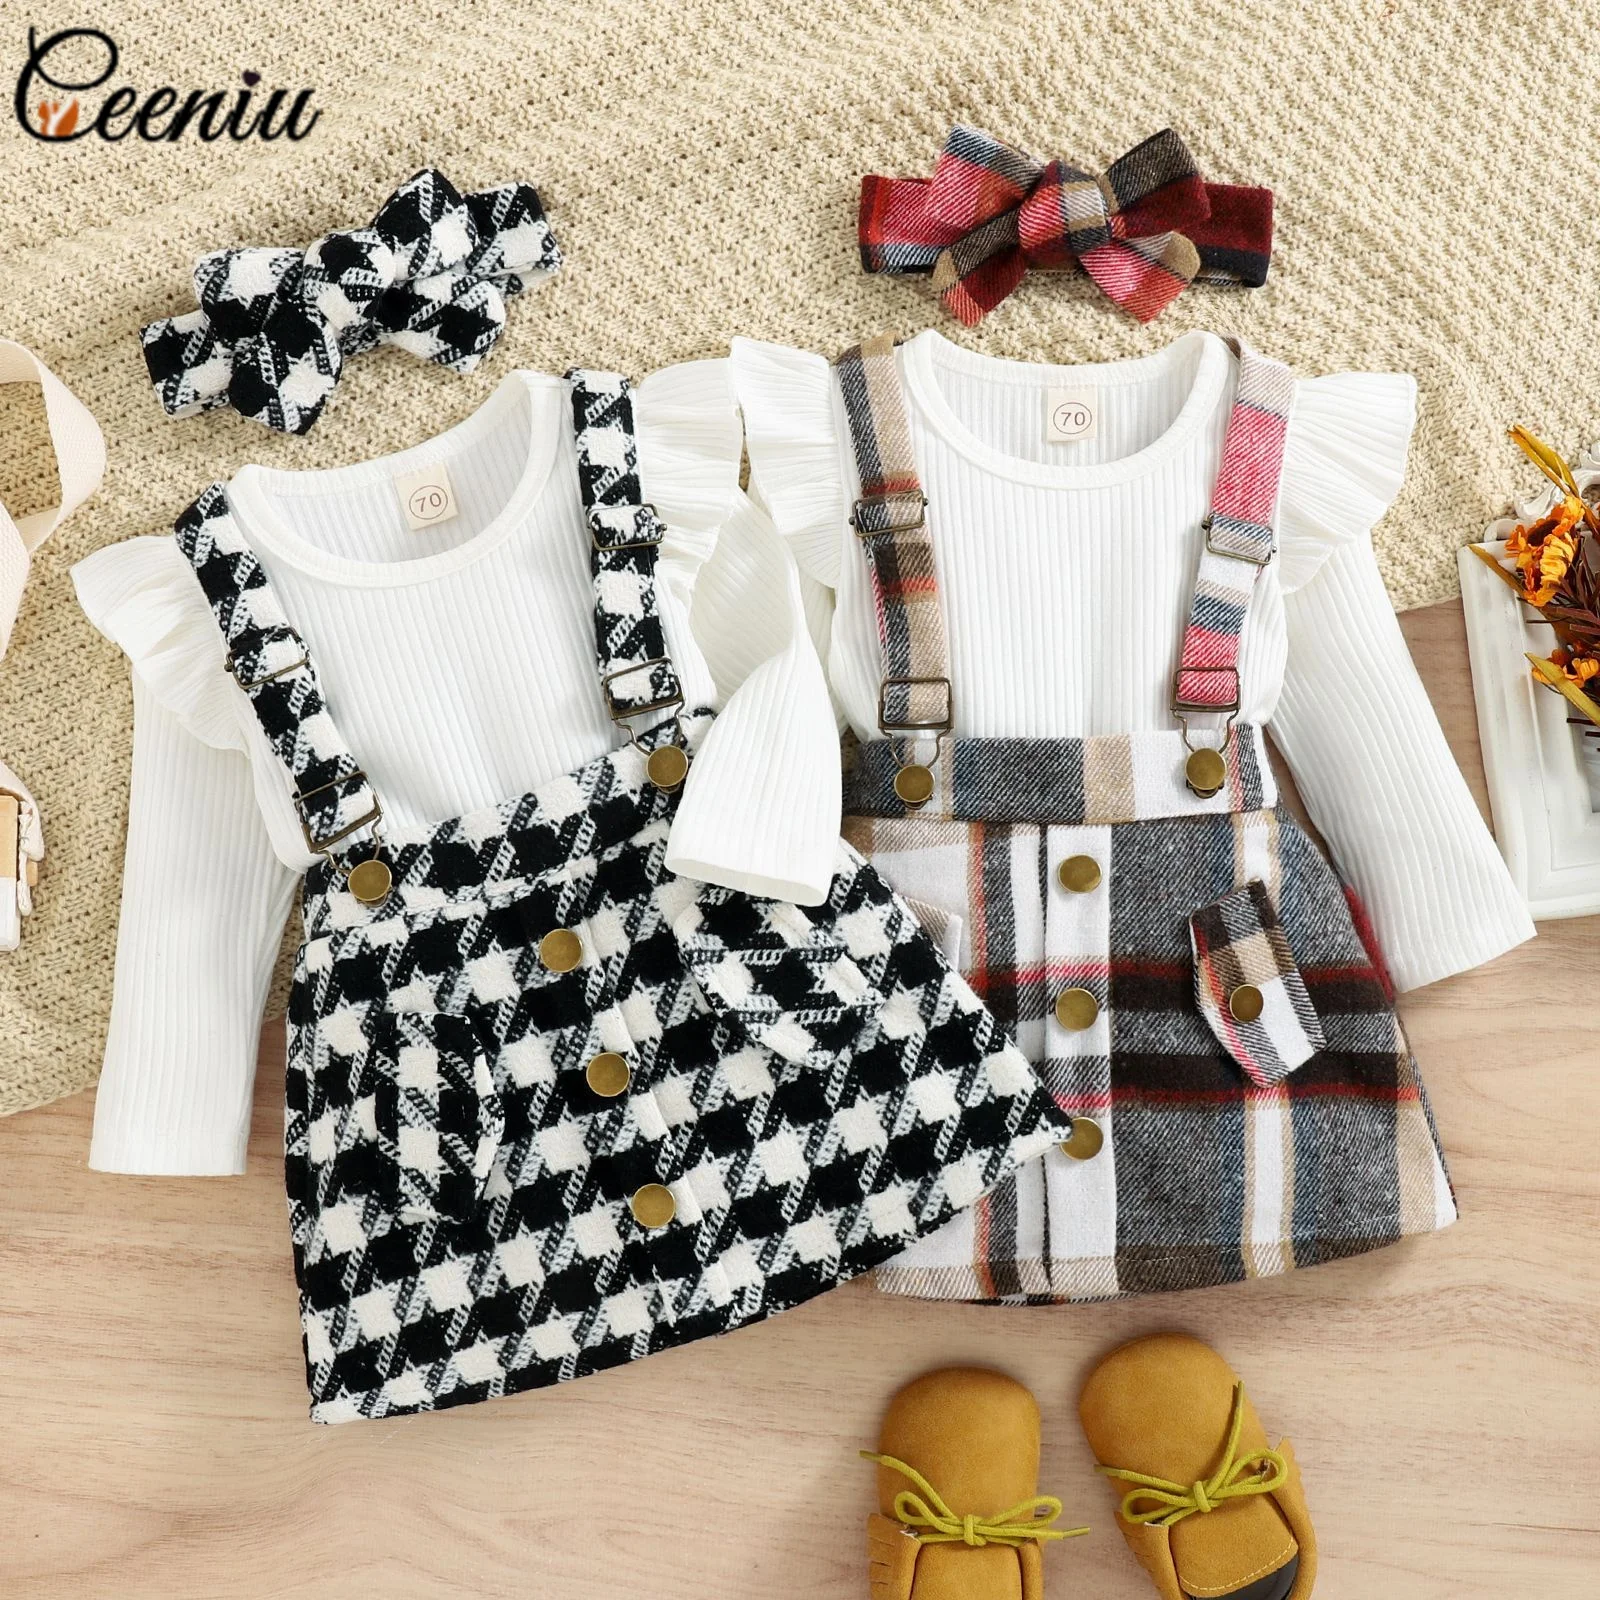 

Ceeniu 0-3Y Toddler Girls Winter Clothes Skirt Sets Long Sleeve White Ruffled Bodysuit+Button Suspender Plaid Skirt Baby Clothes